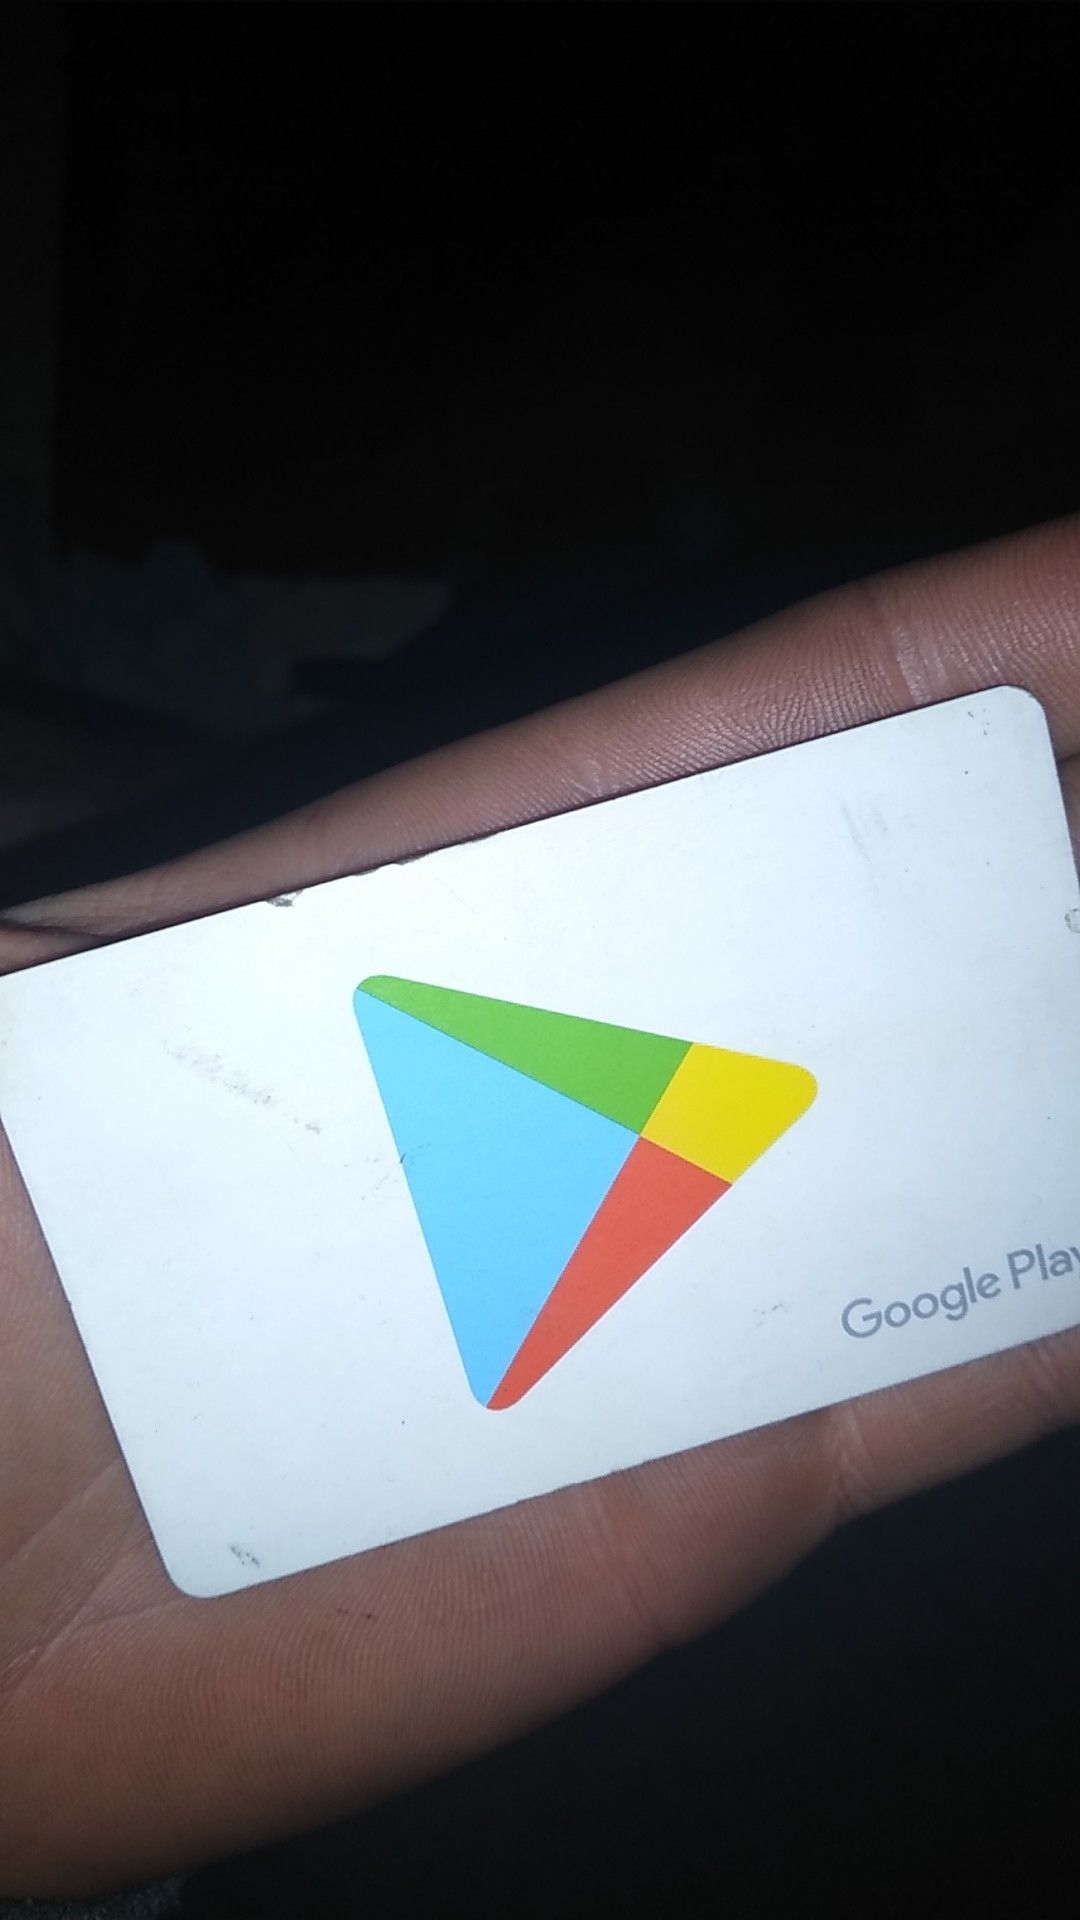 Google play card 80$ on it I'm asking for 60$